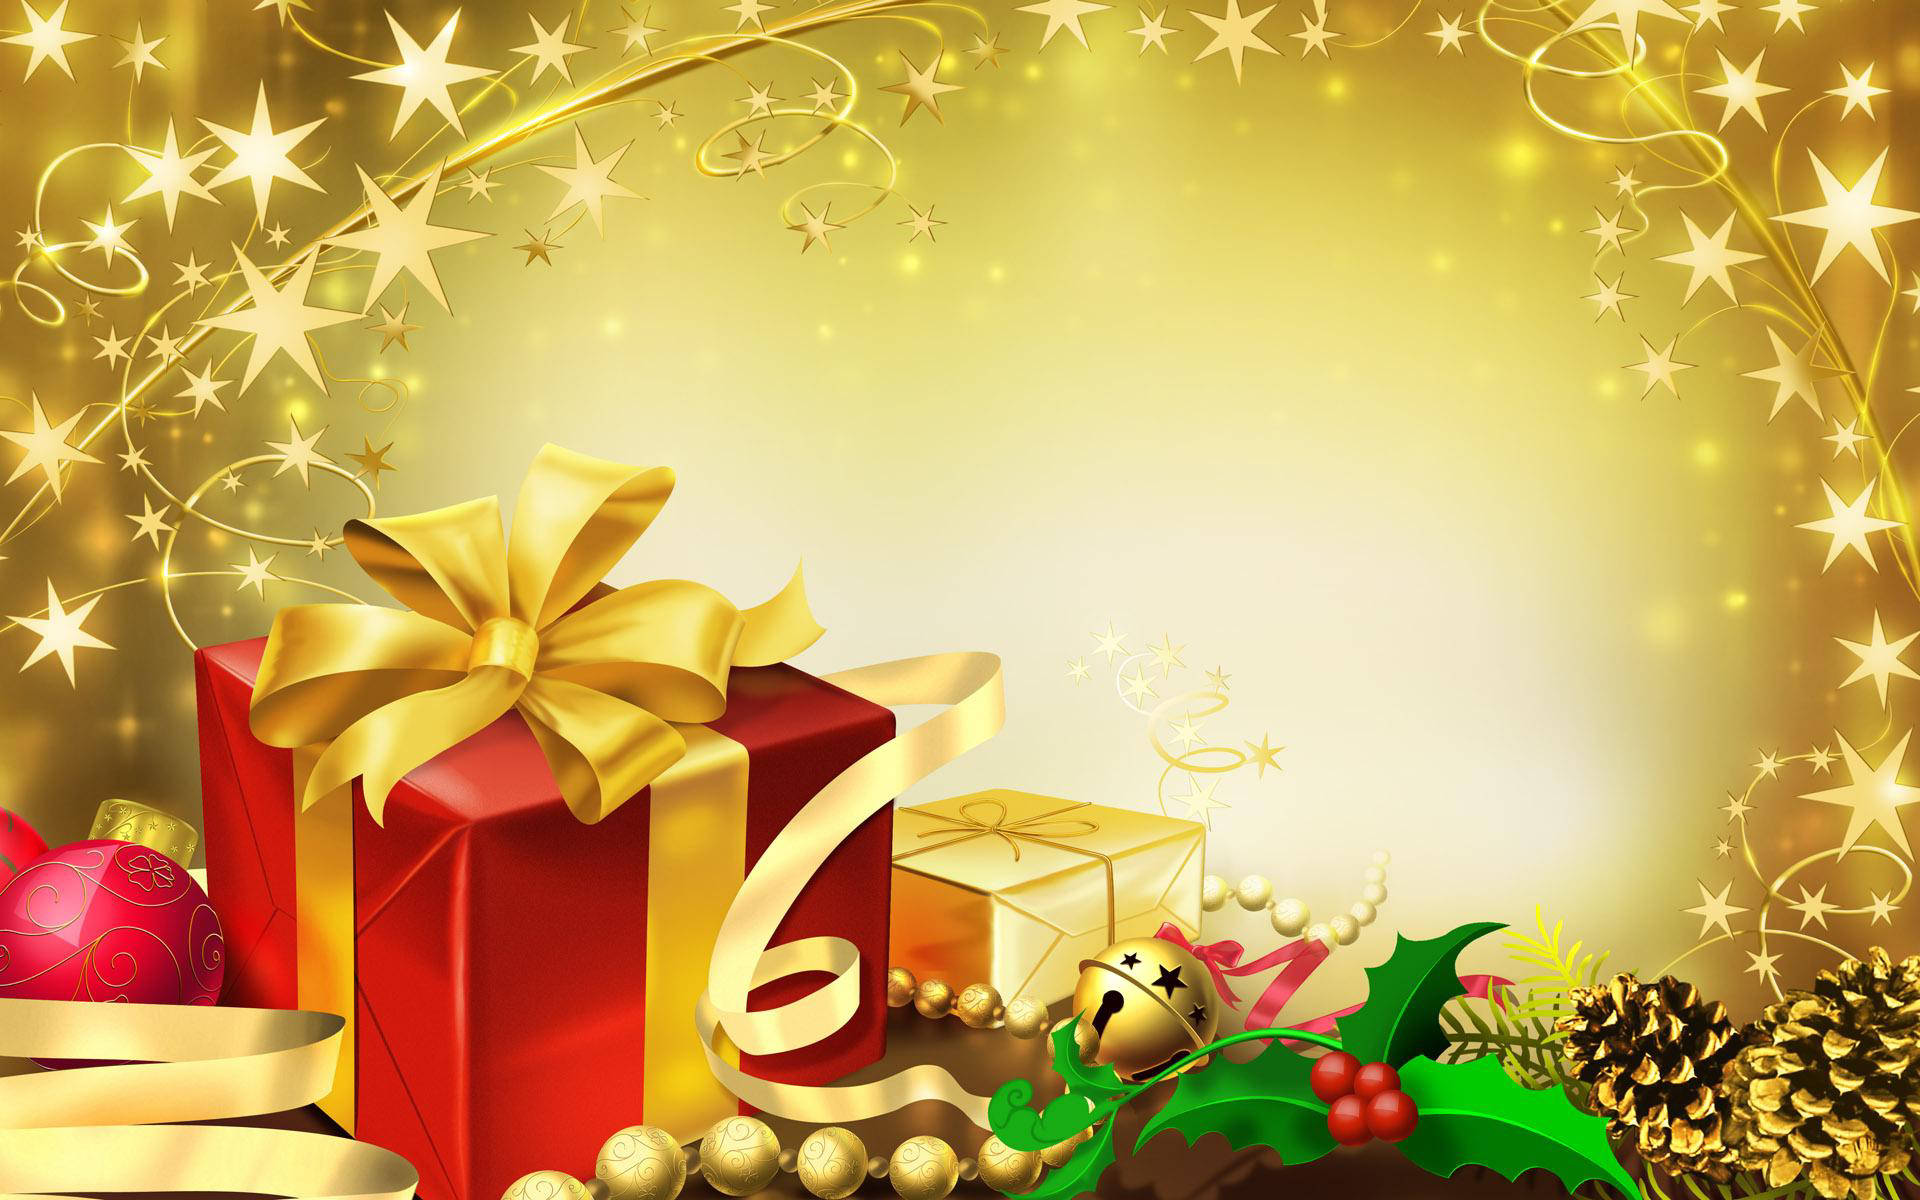 Christmas holiday wallpaper backgrounds   SF Wallpaper